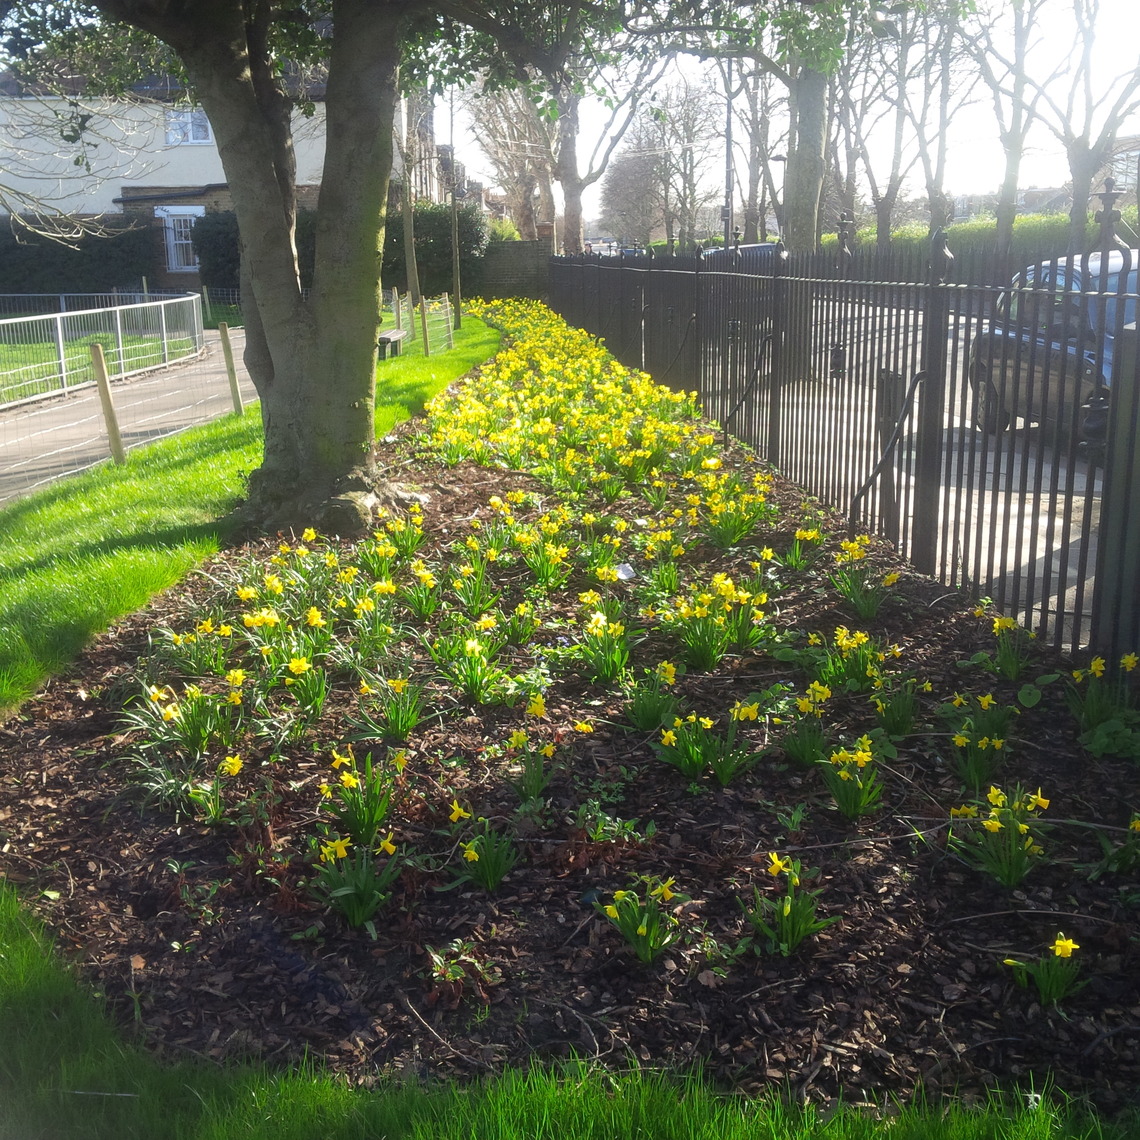 Daffodils in the Rec 2